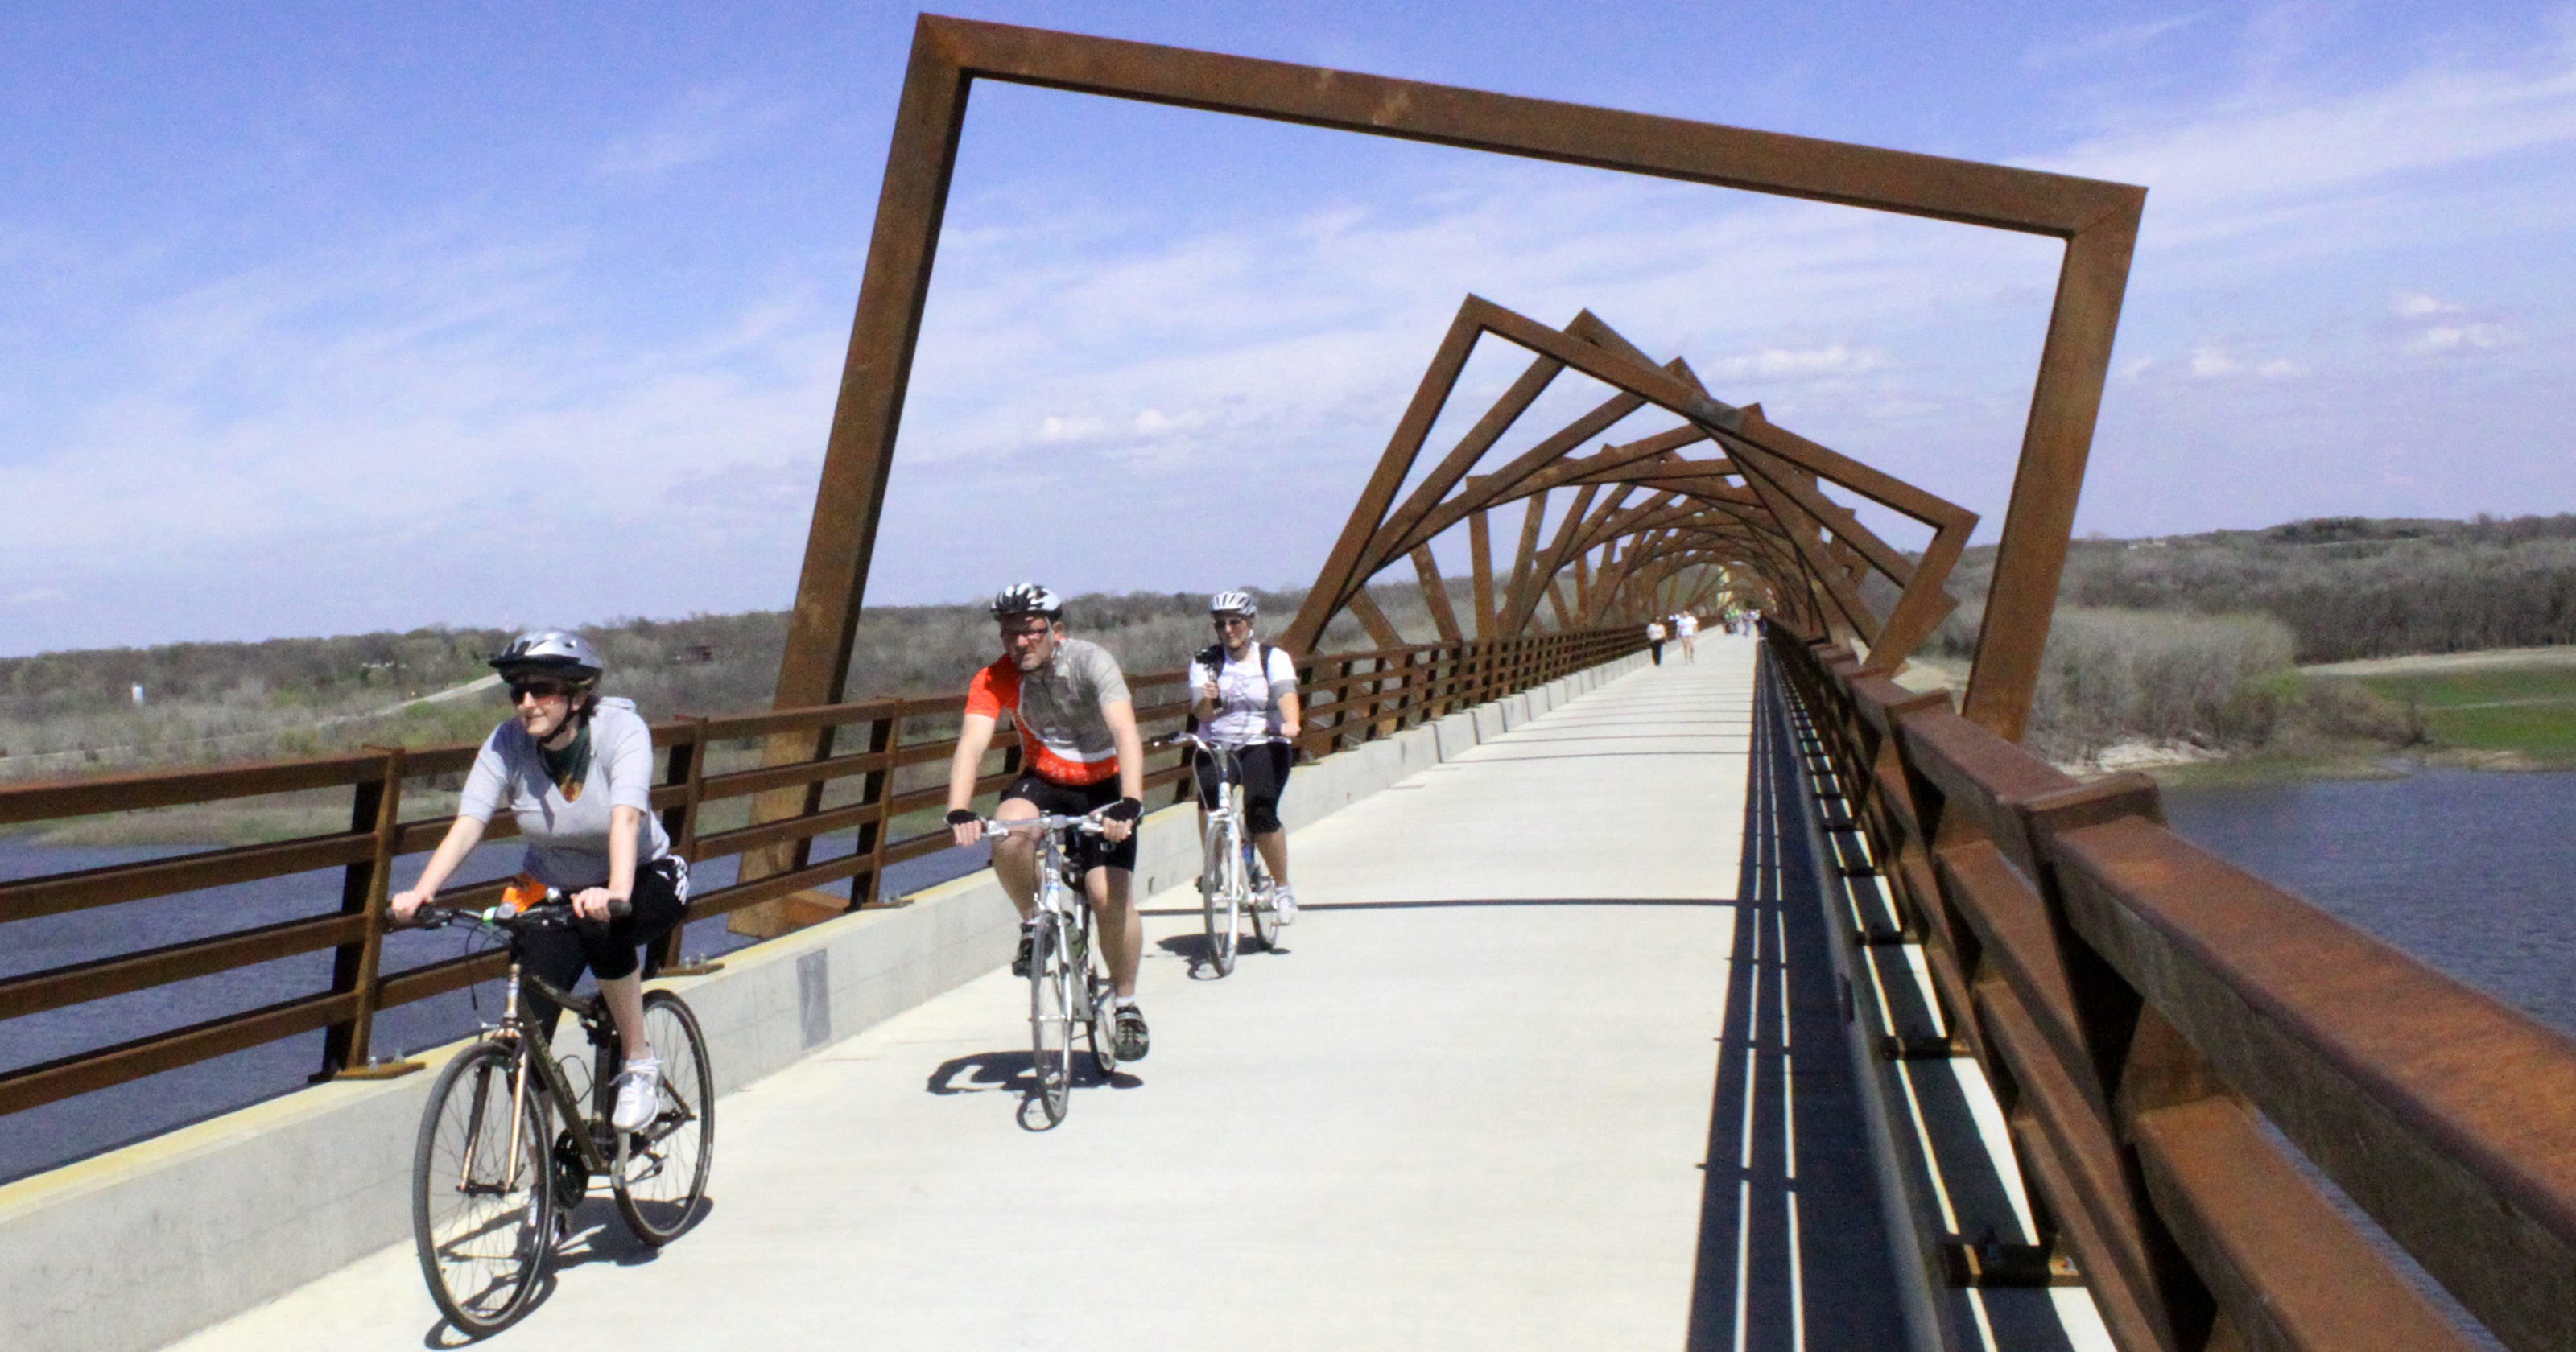 Uptown Ankeny restaurantbar will cater to cyclists on the High Trestle